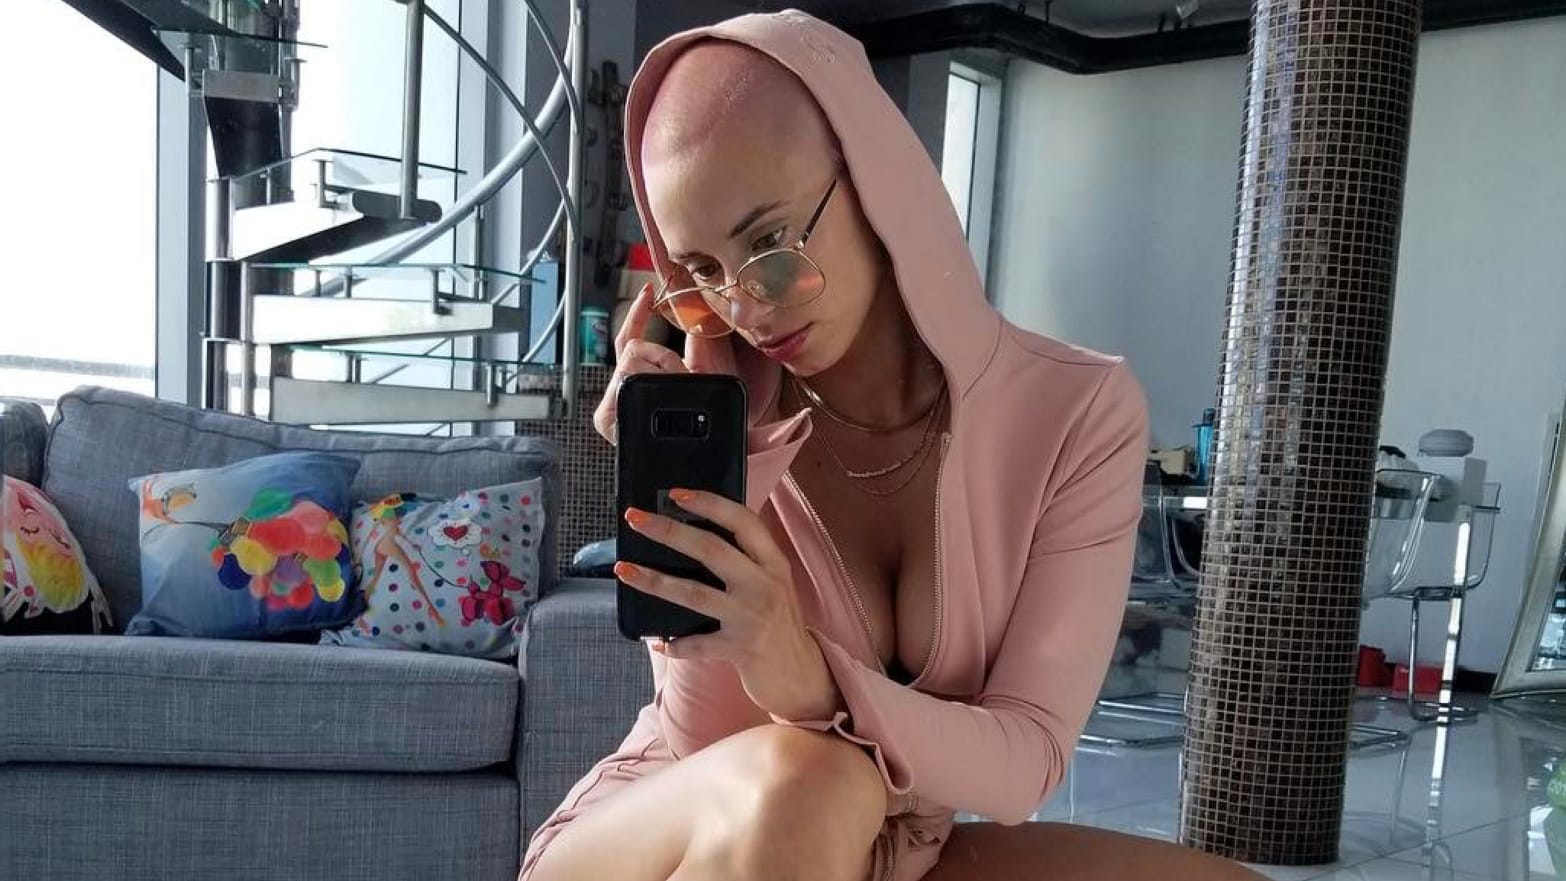 barbara schwenk recommends yesjulz sex tape pic